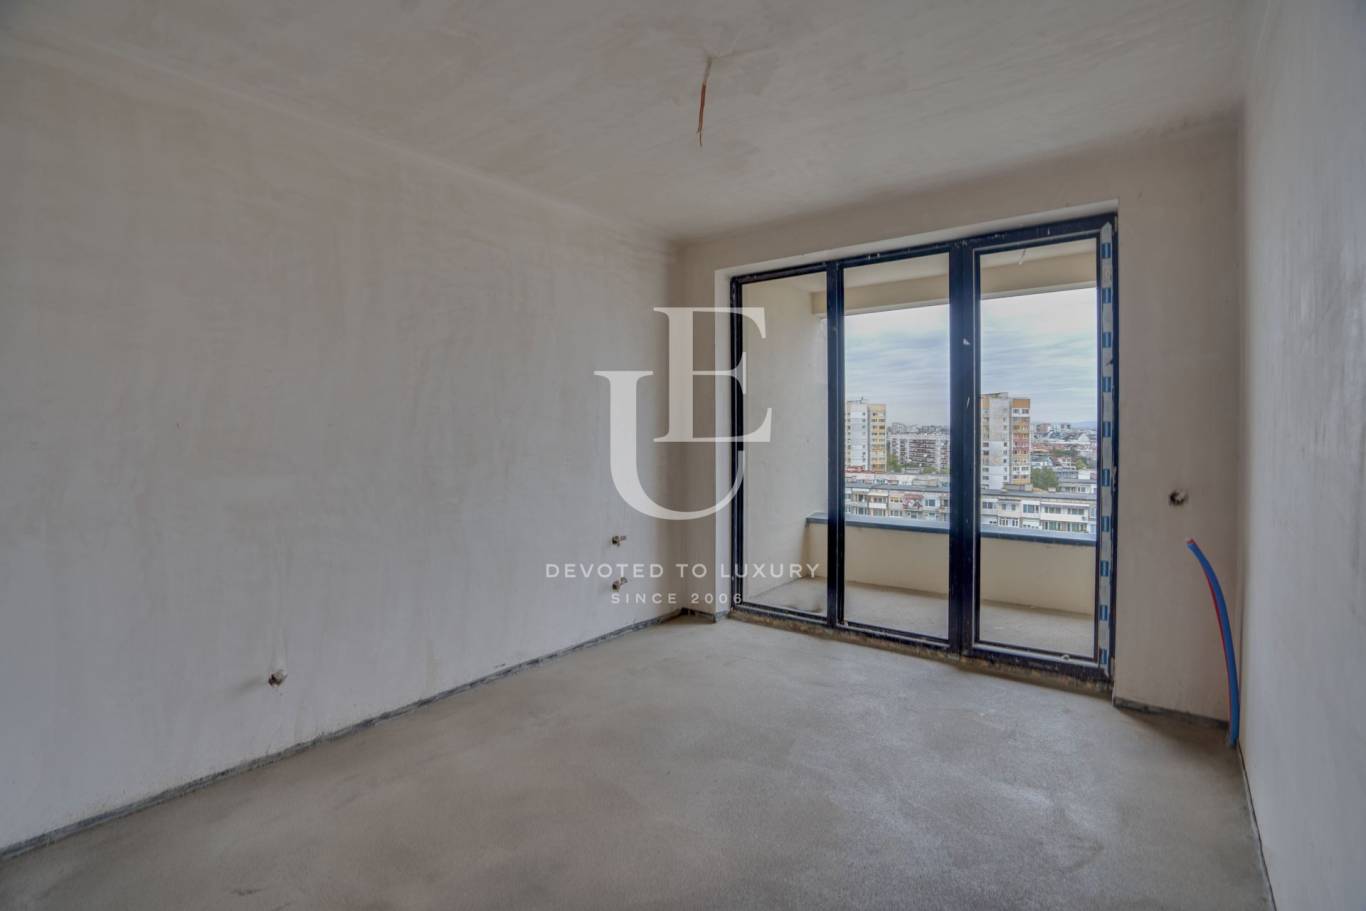 Apartment for sale in Sofia, Vazrajdane with listing ID: K14864 - image 2